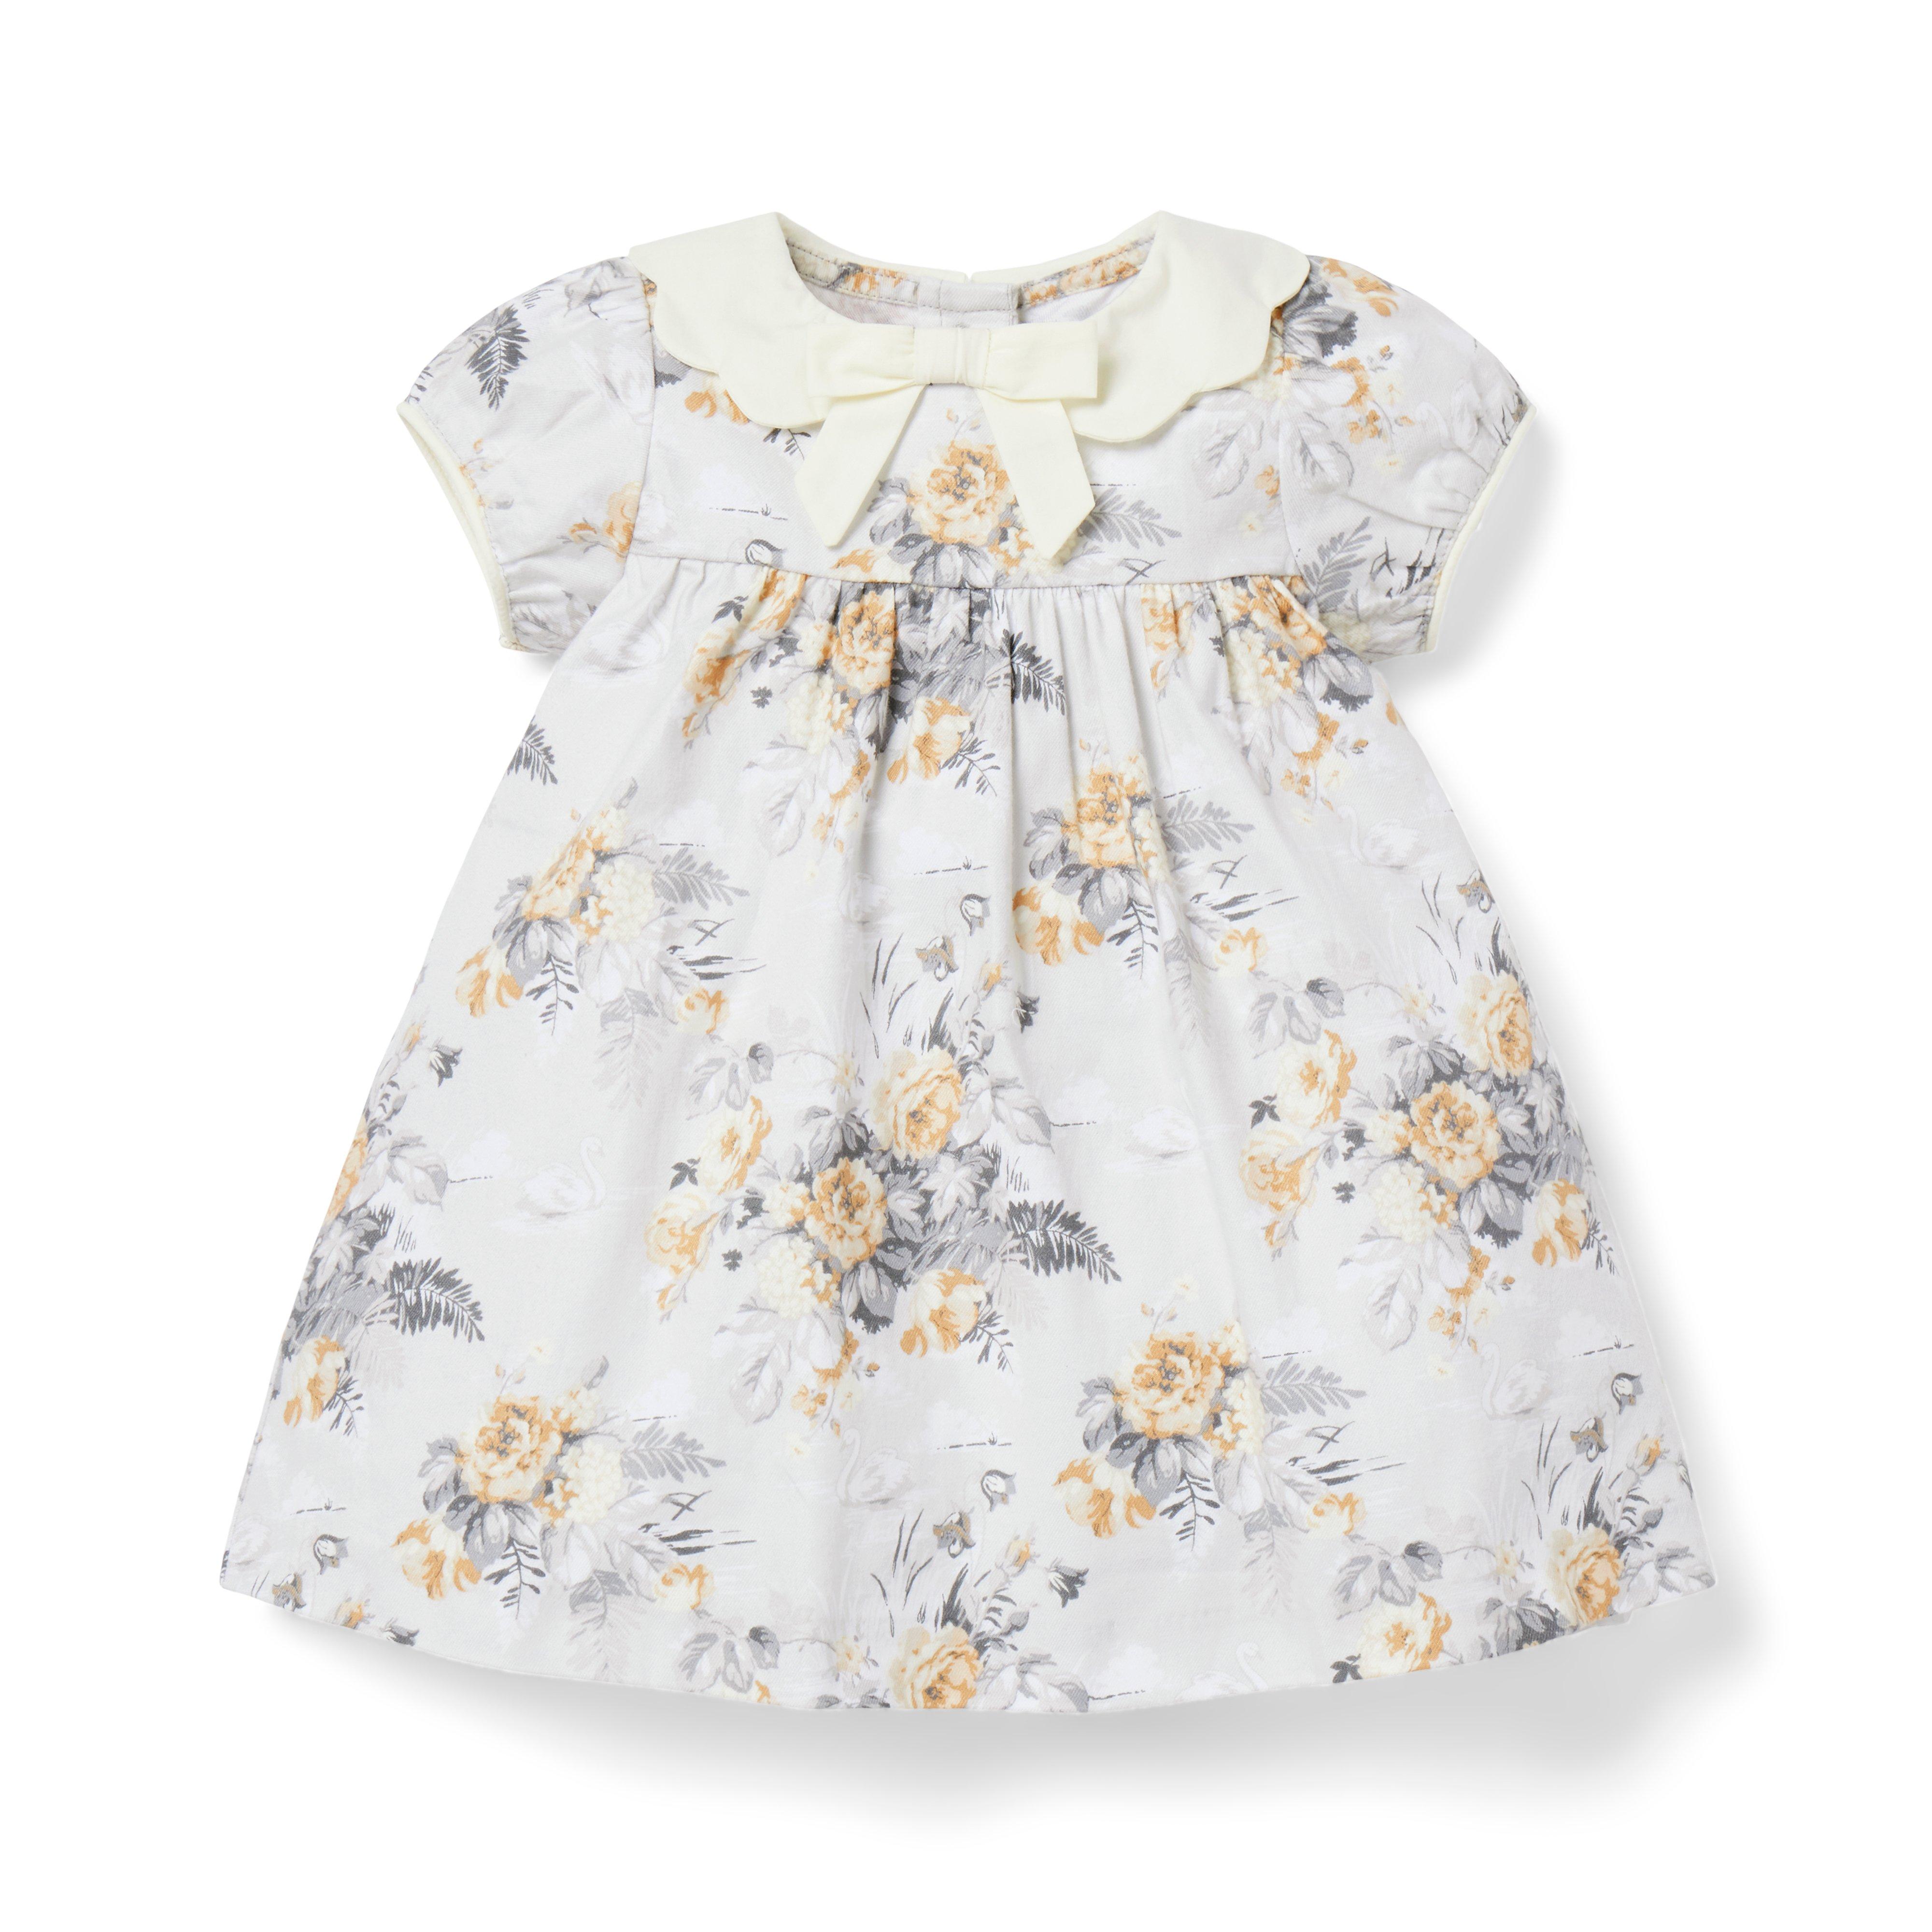 Cute Janie and Jack Dress Baby Girl 12 18 months Gold Light Yellow A line  Lined